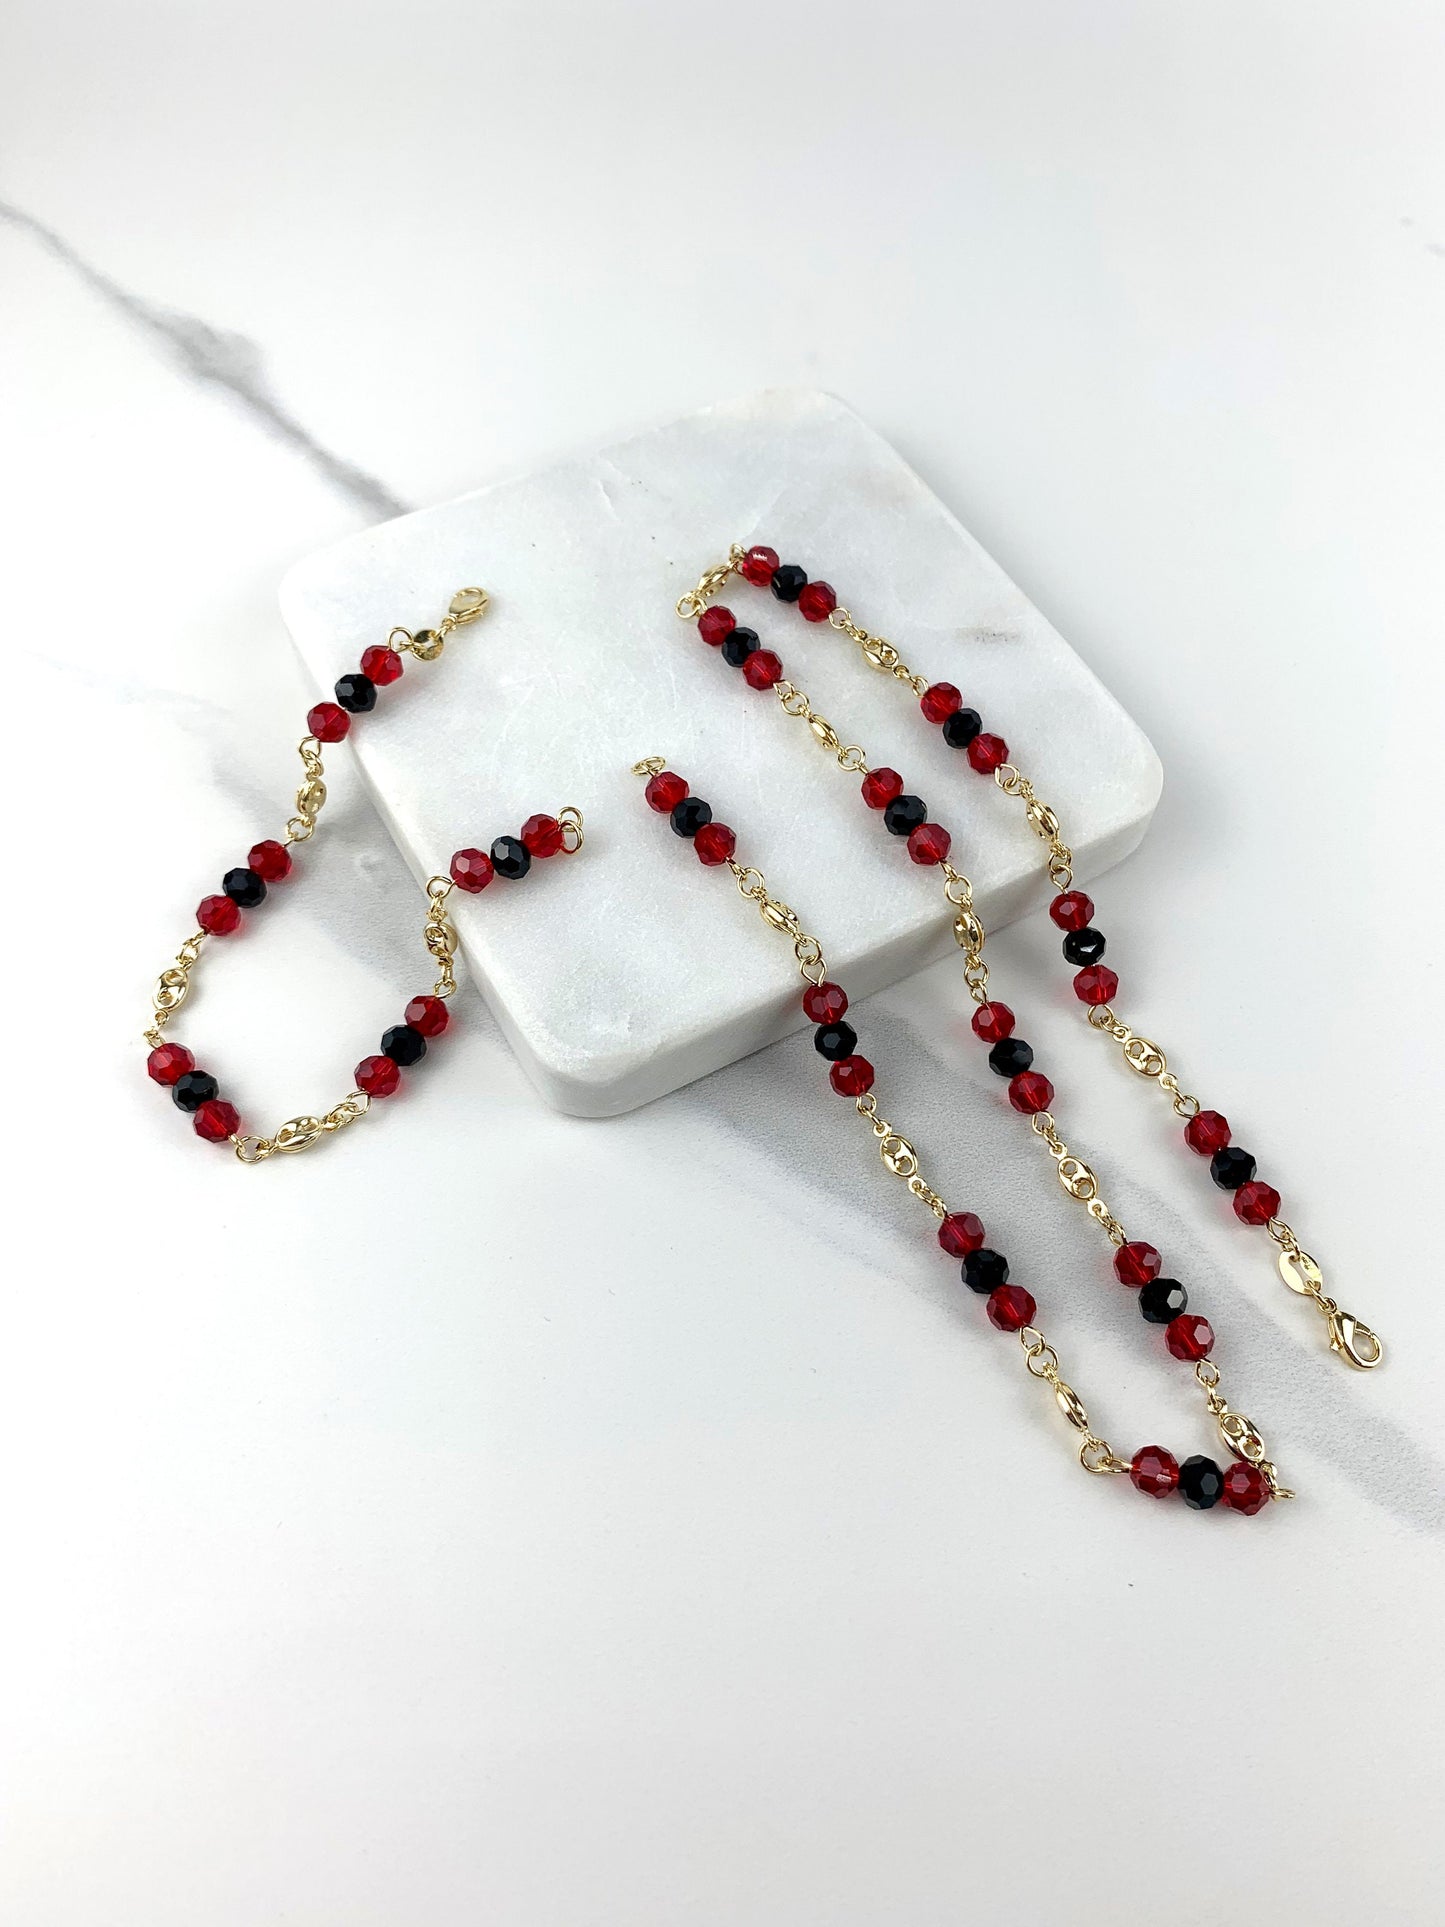 18k Gold Filled Fancy Chunky Link Mariner Chain Linked with Black & Red Beads, Necklace, Bracelet or Earrings, Wholesale Jewelry Supplies